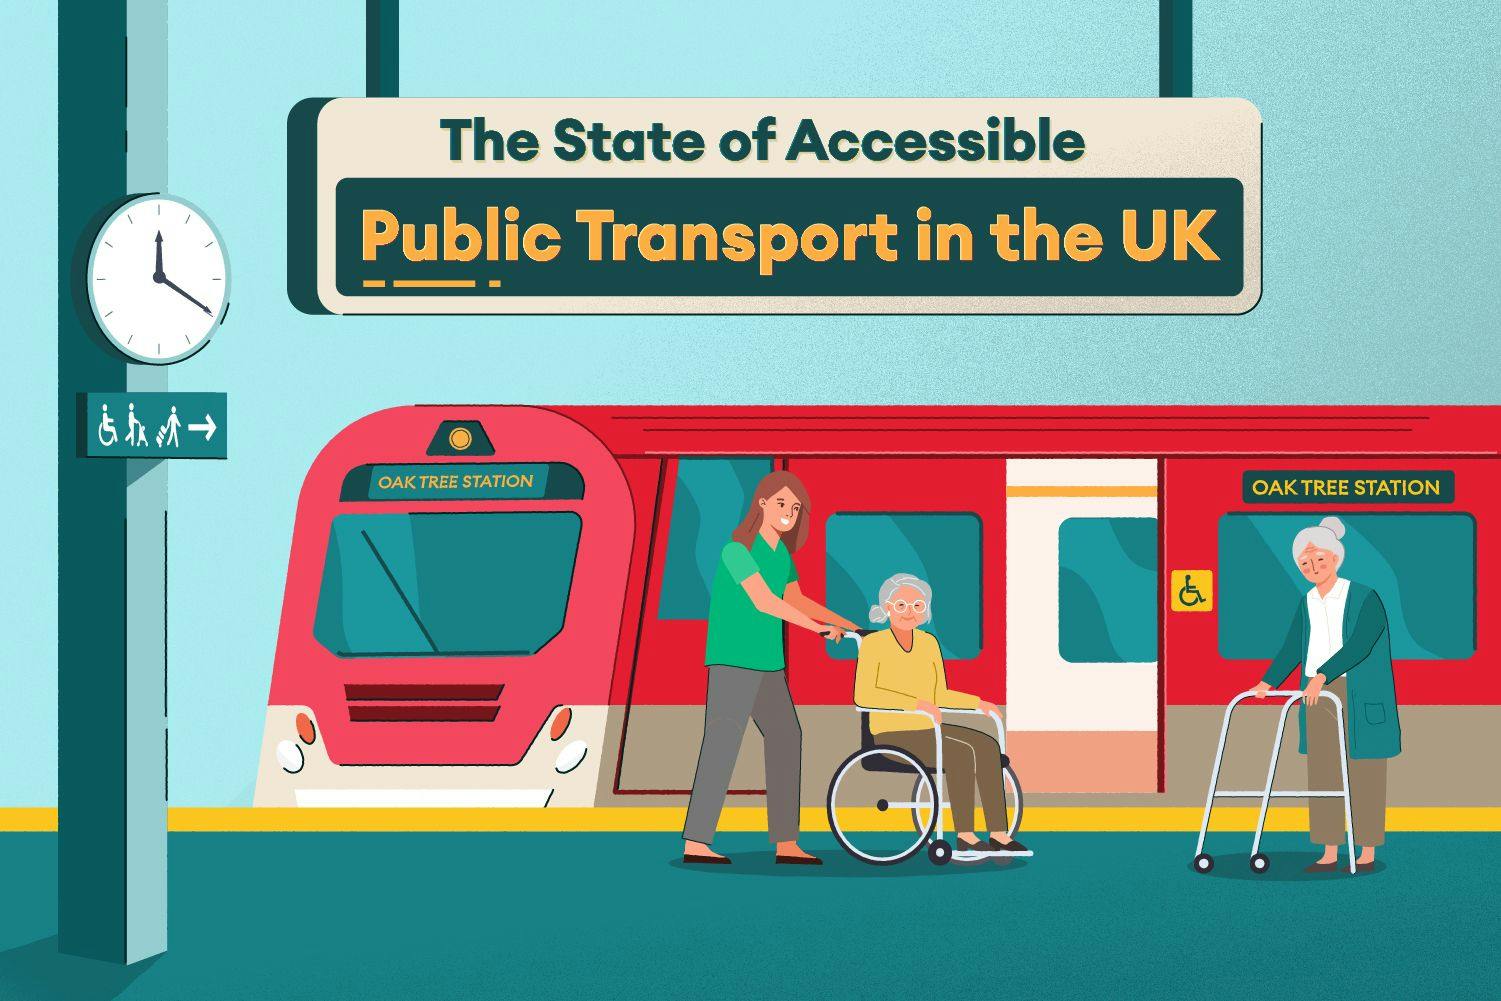 The State of Accessible Public Transport in the UK